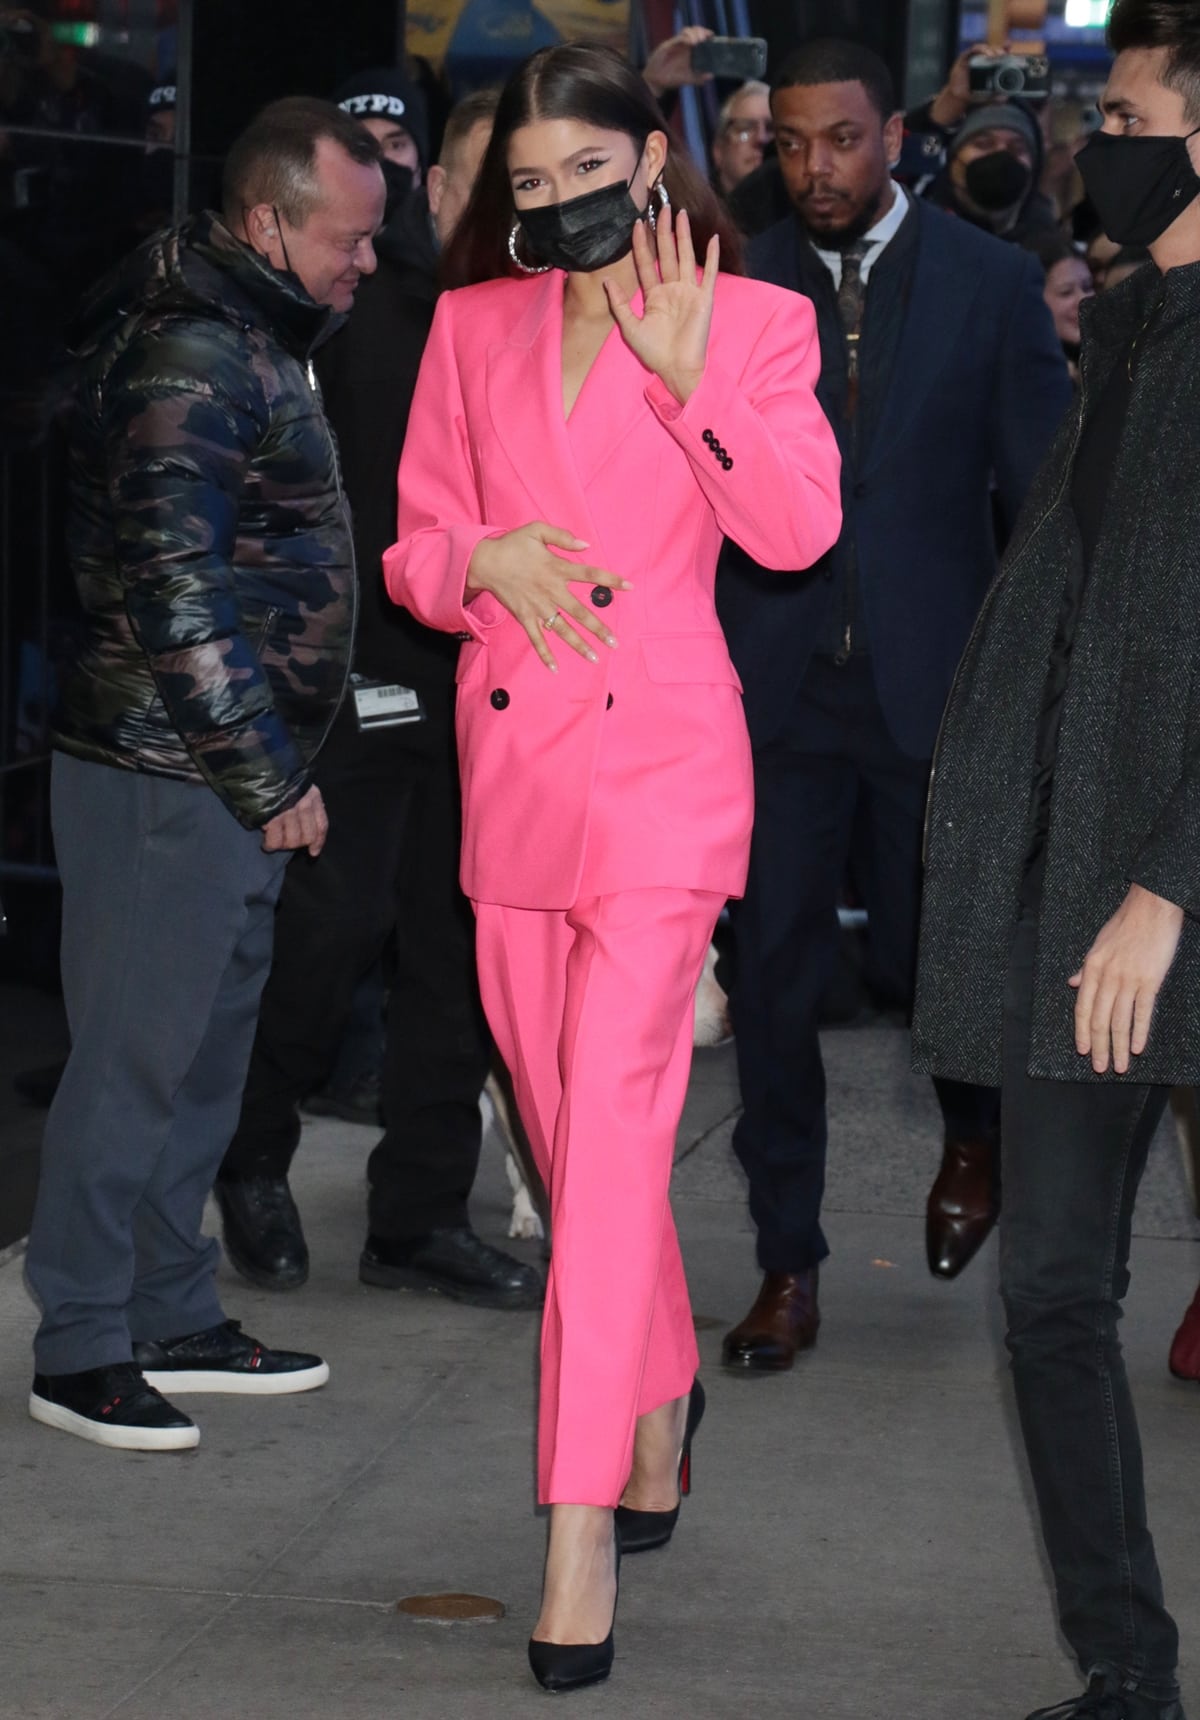 Zendaya arrives in a pink suit for her appearance on Good Morning America